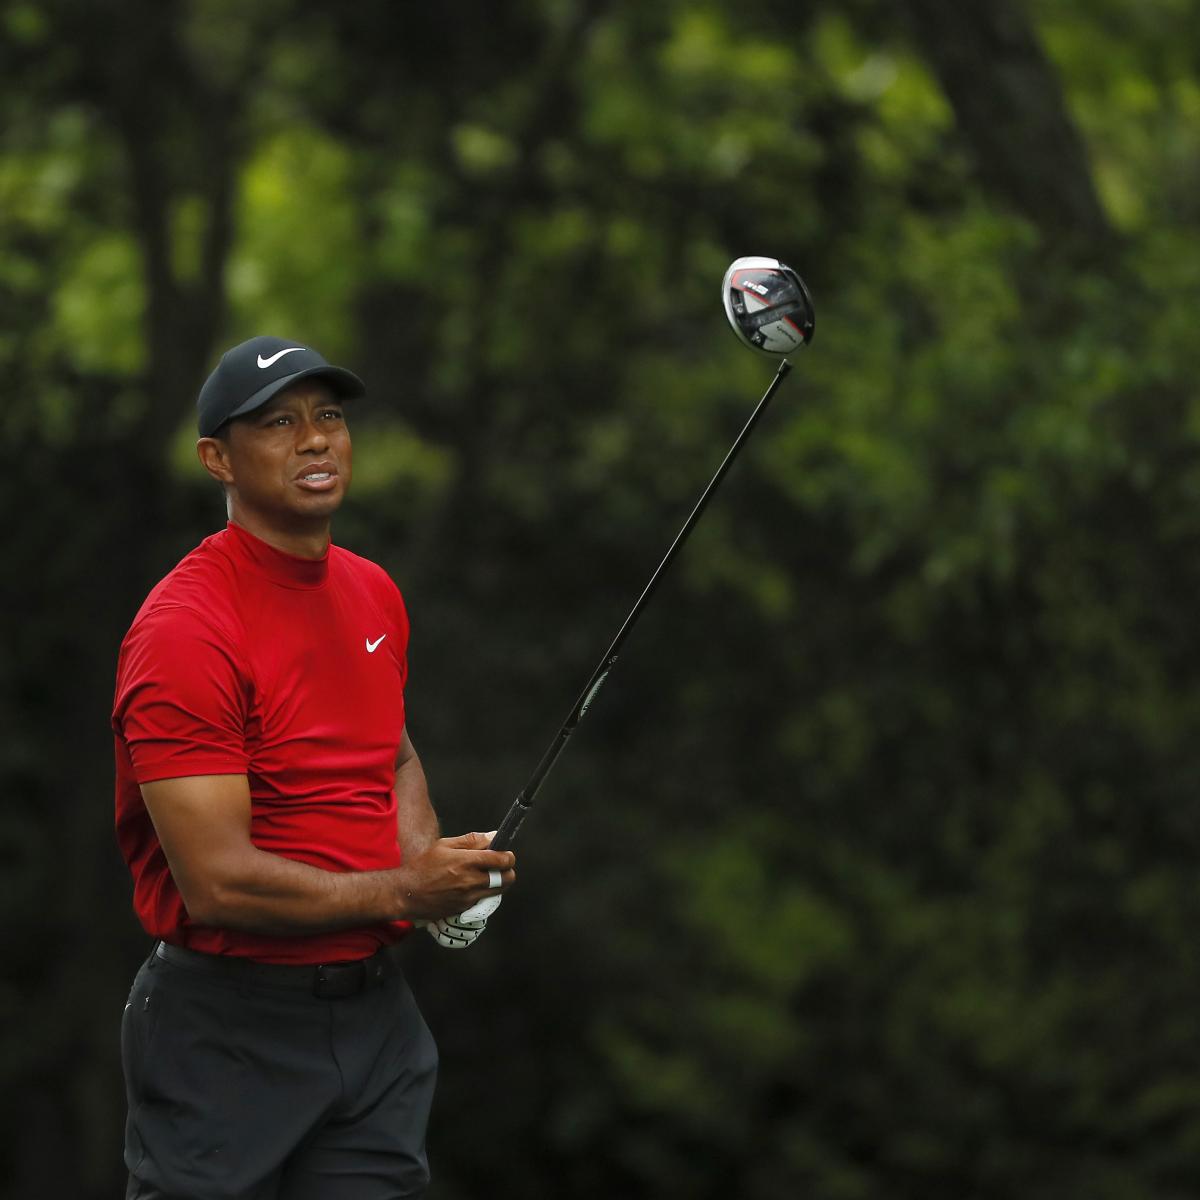 Tiger Woods at 2019 Masters: Top Highlights, Full Scorecard from Thrilling Win ...